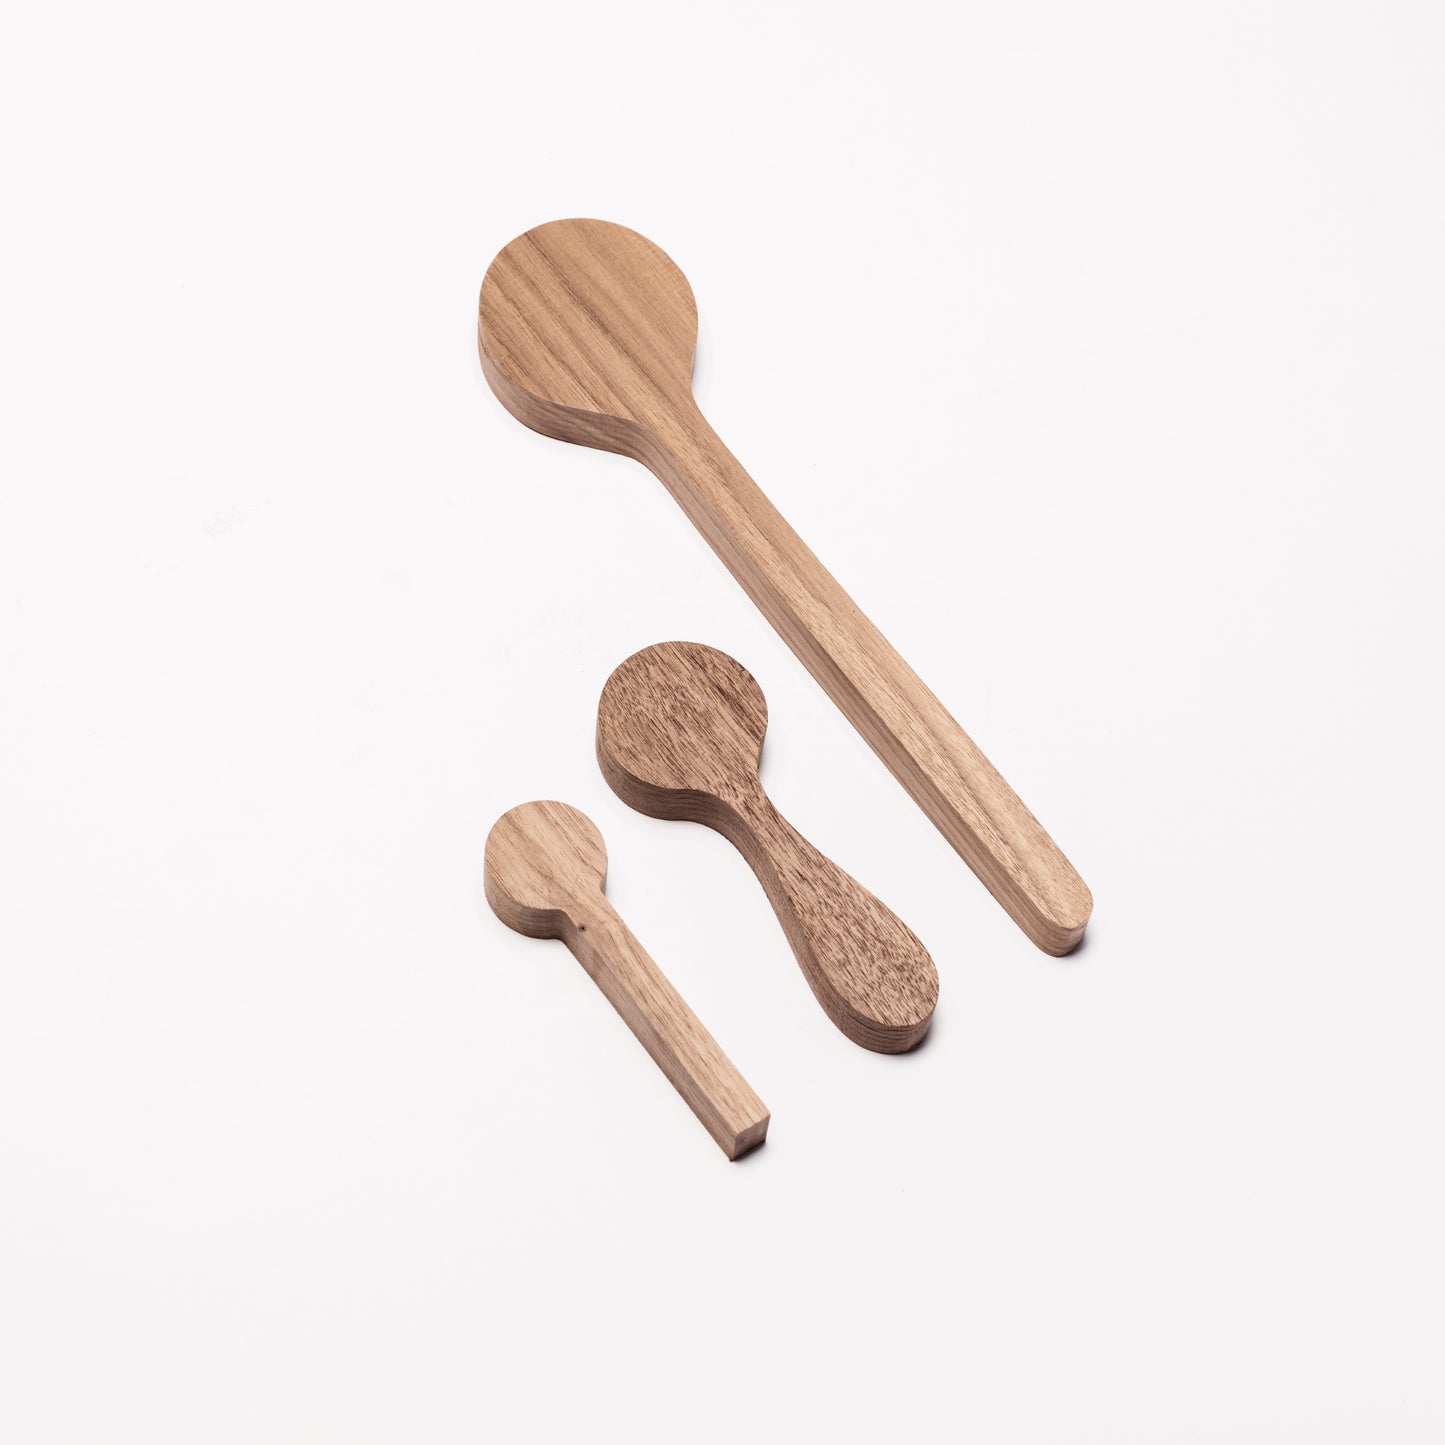 Regular, coffee, and cooking spoons in Walnut wood. At an angle. By Melanie Abrantes Designs.